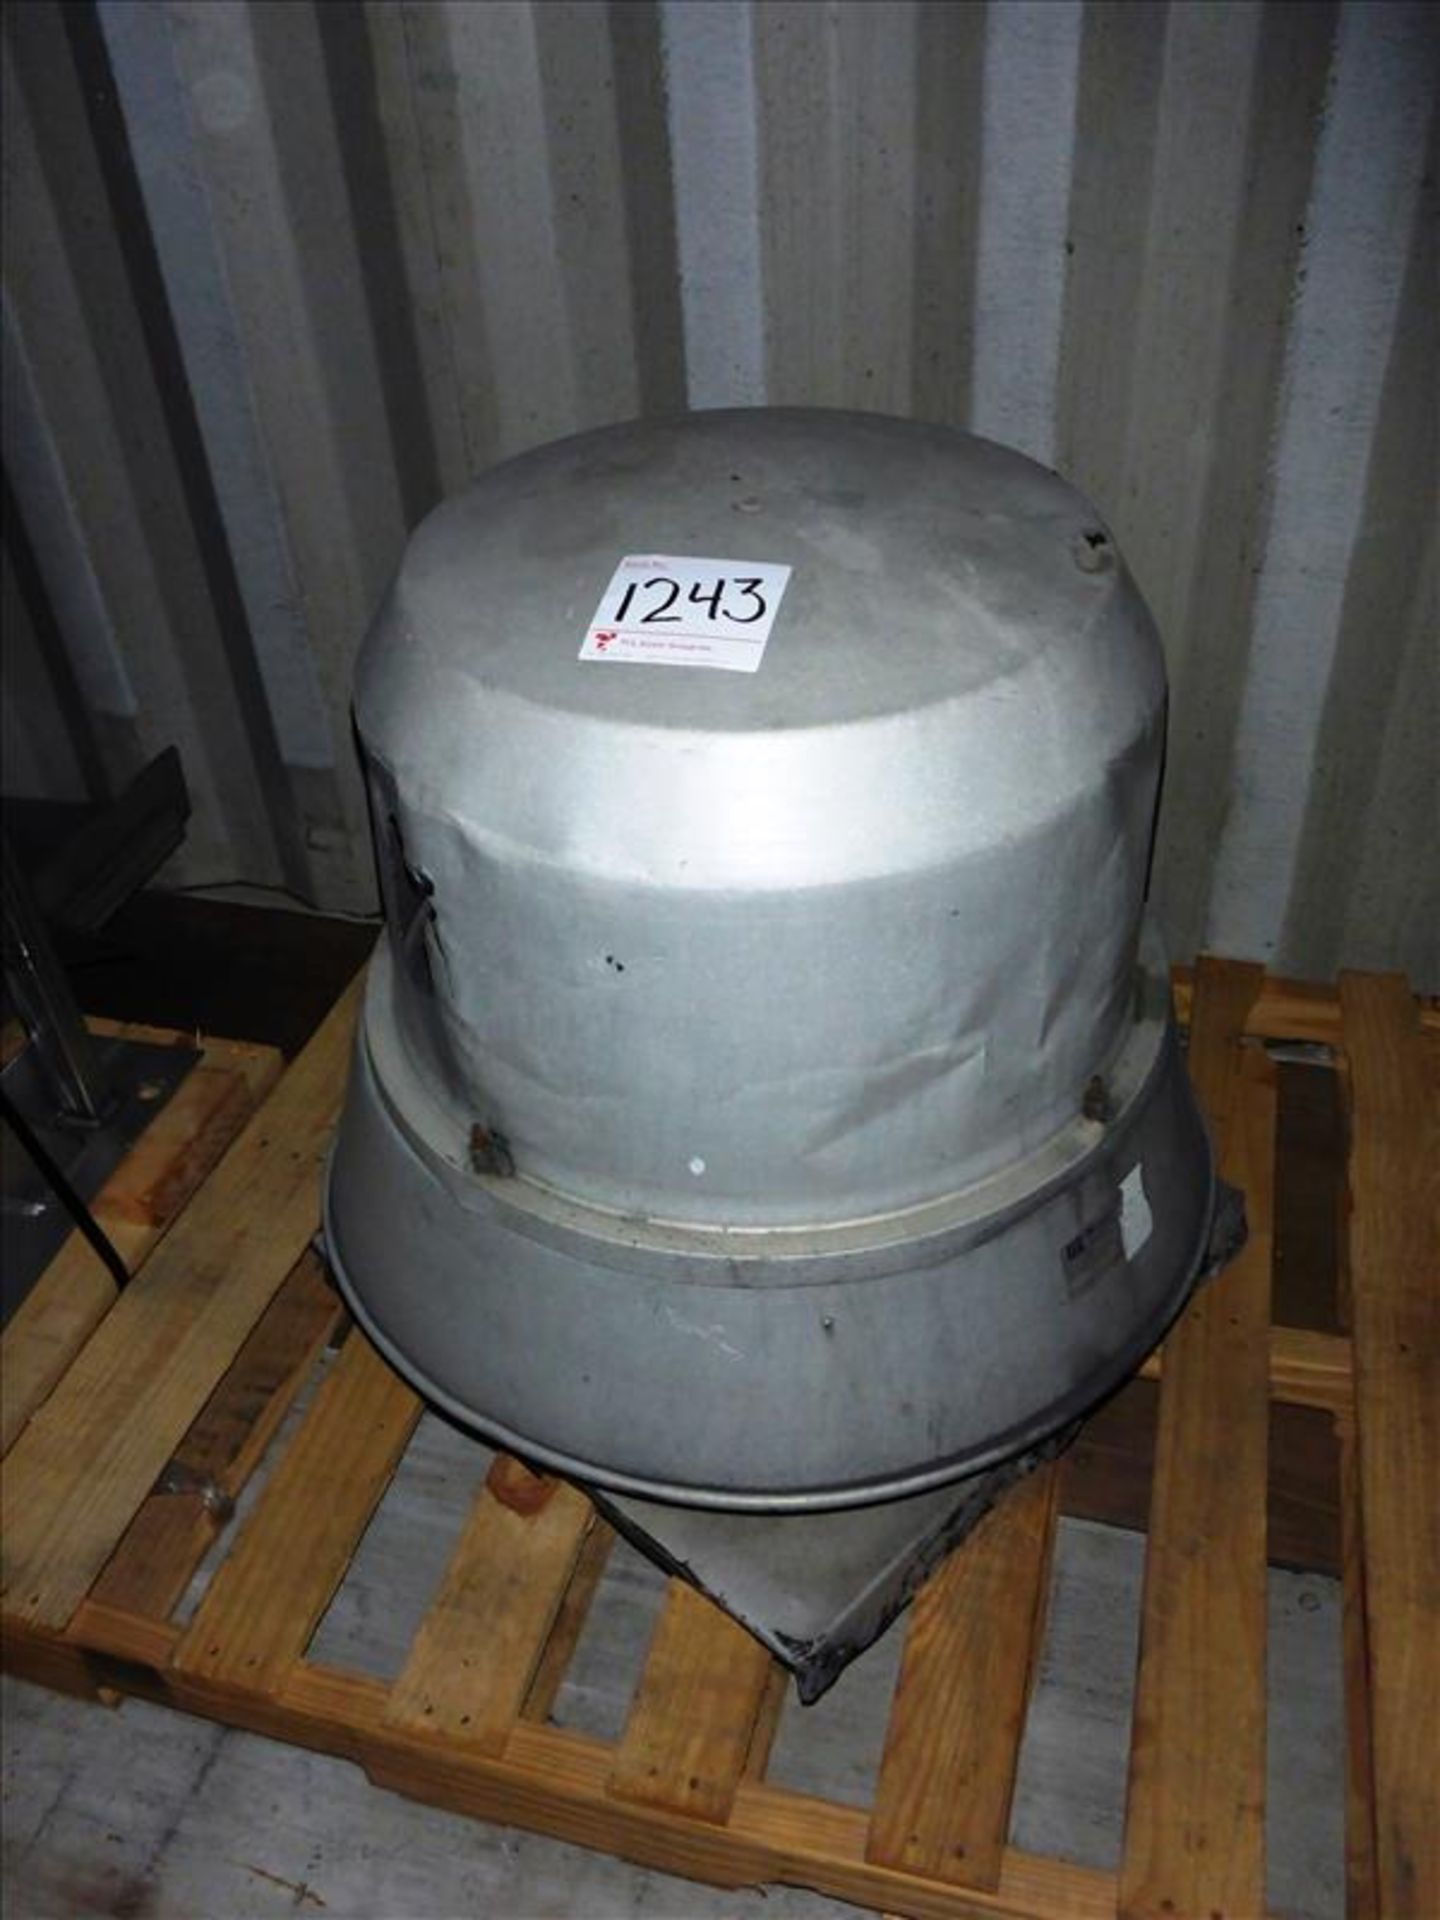 ILG Ind. exhaust fan (Tag No. 1243)